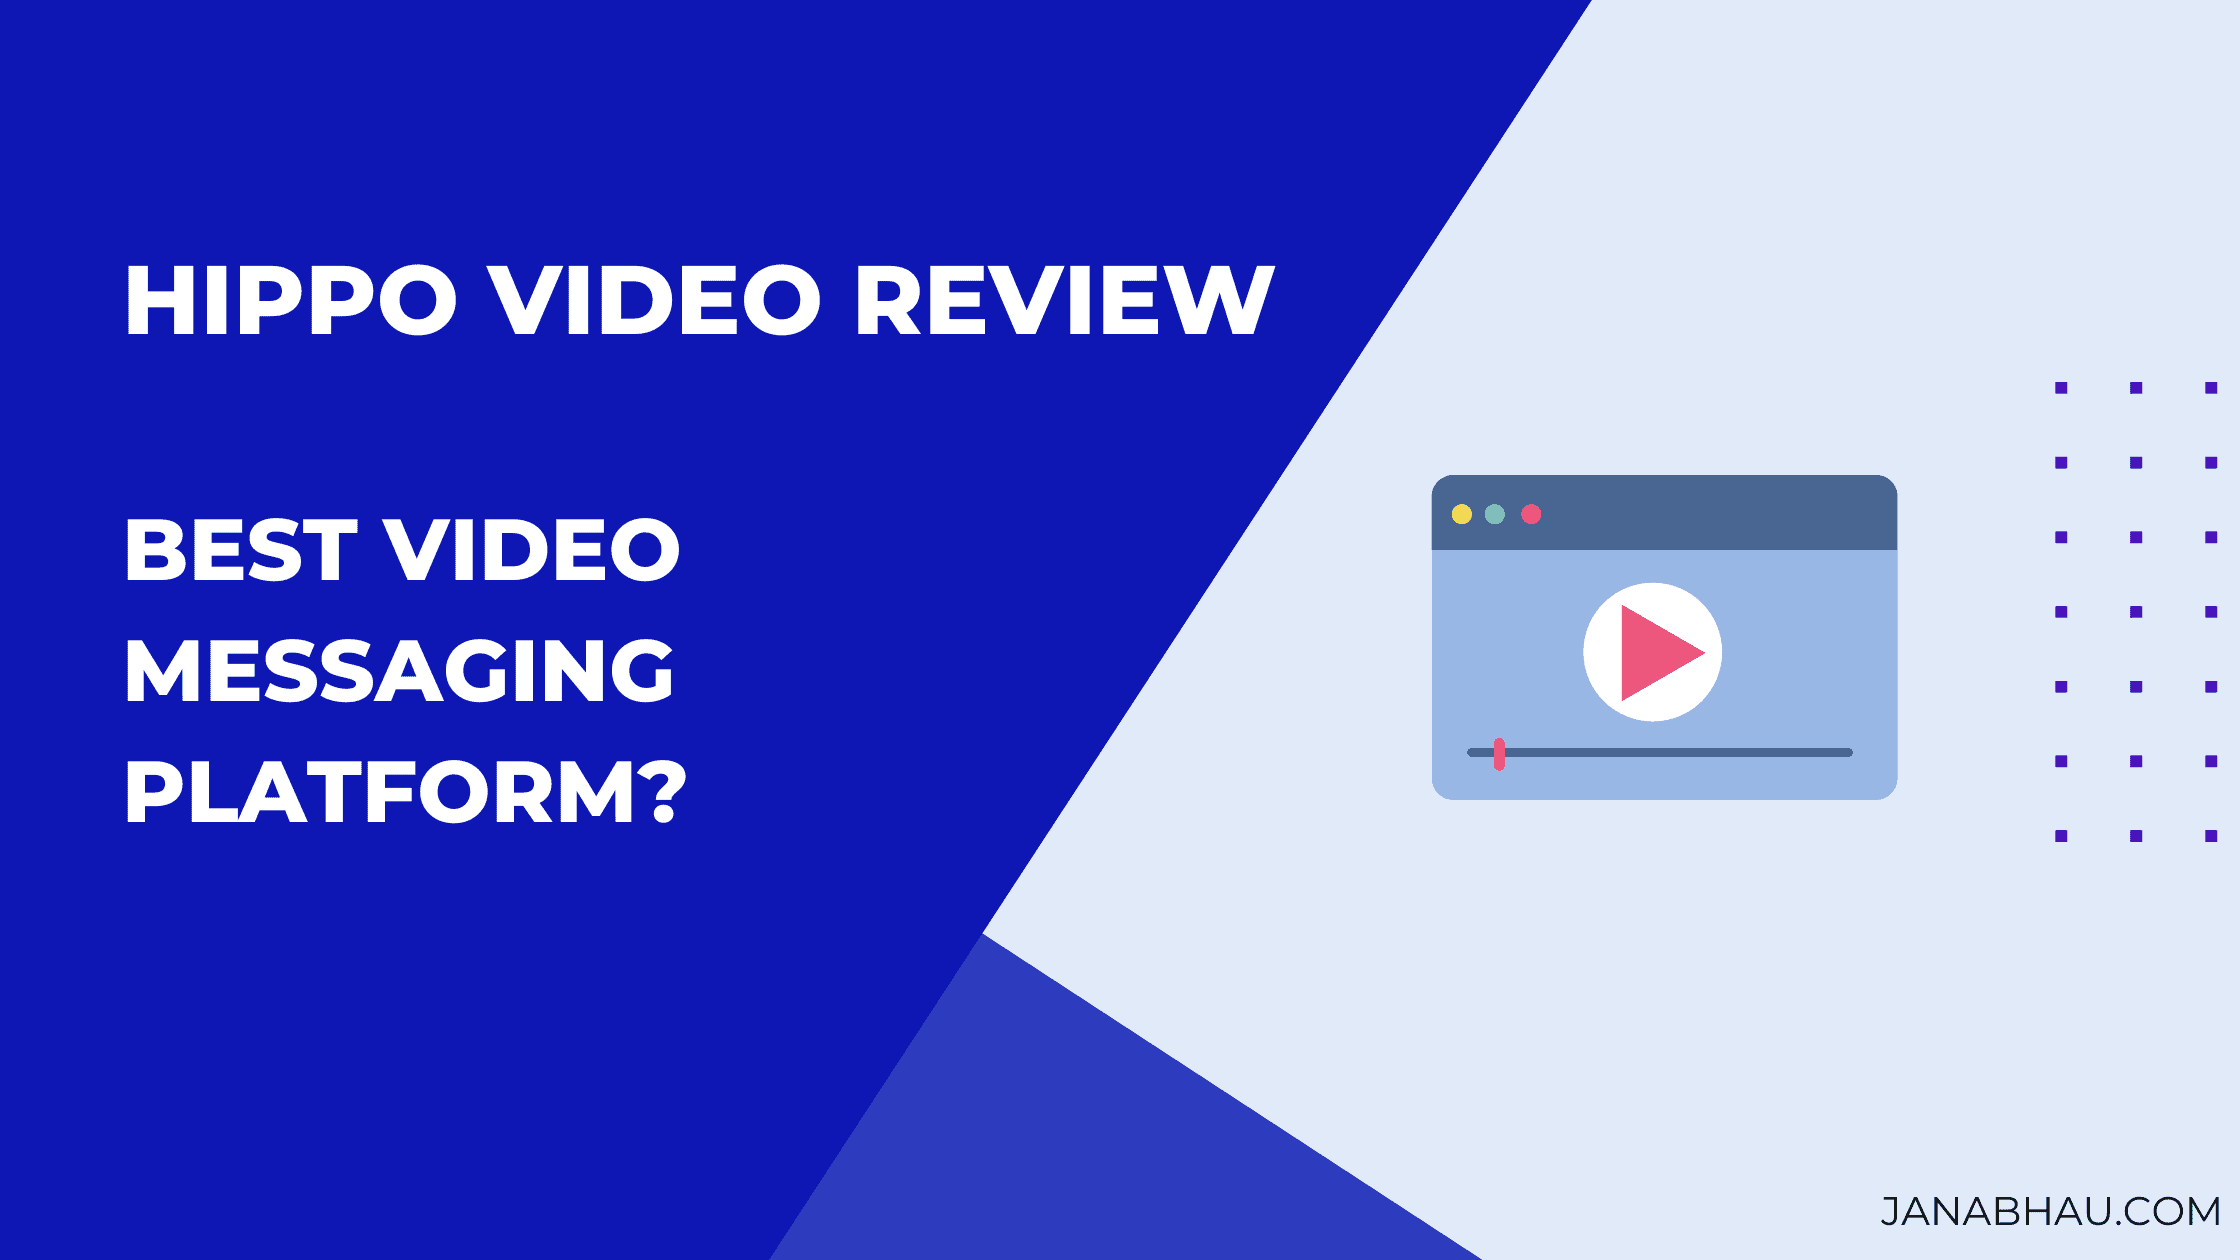 Hippo Video Review